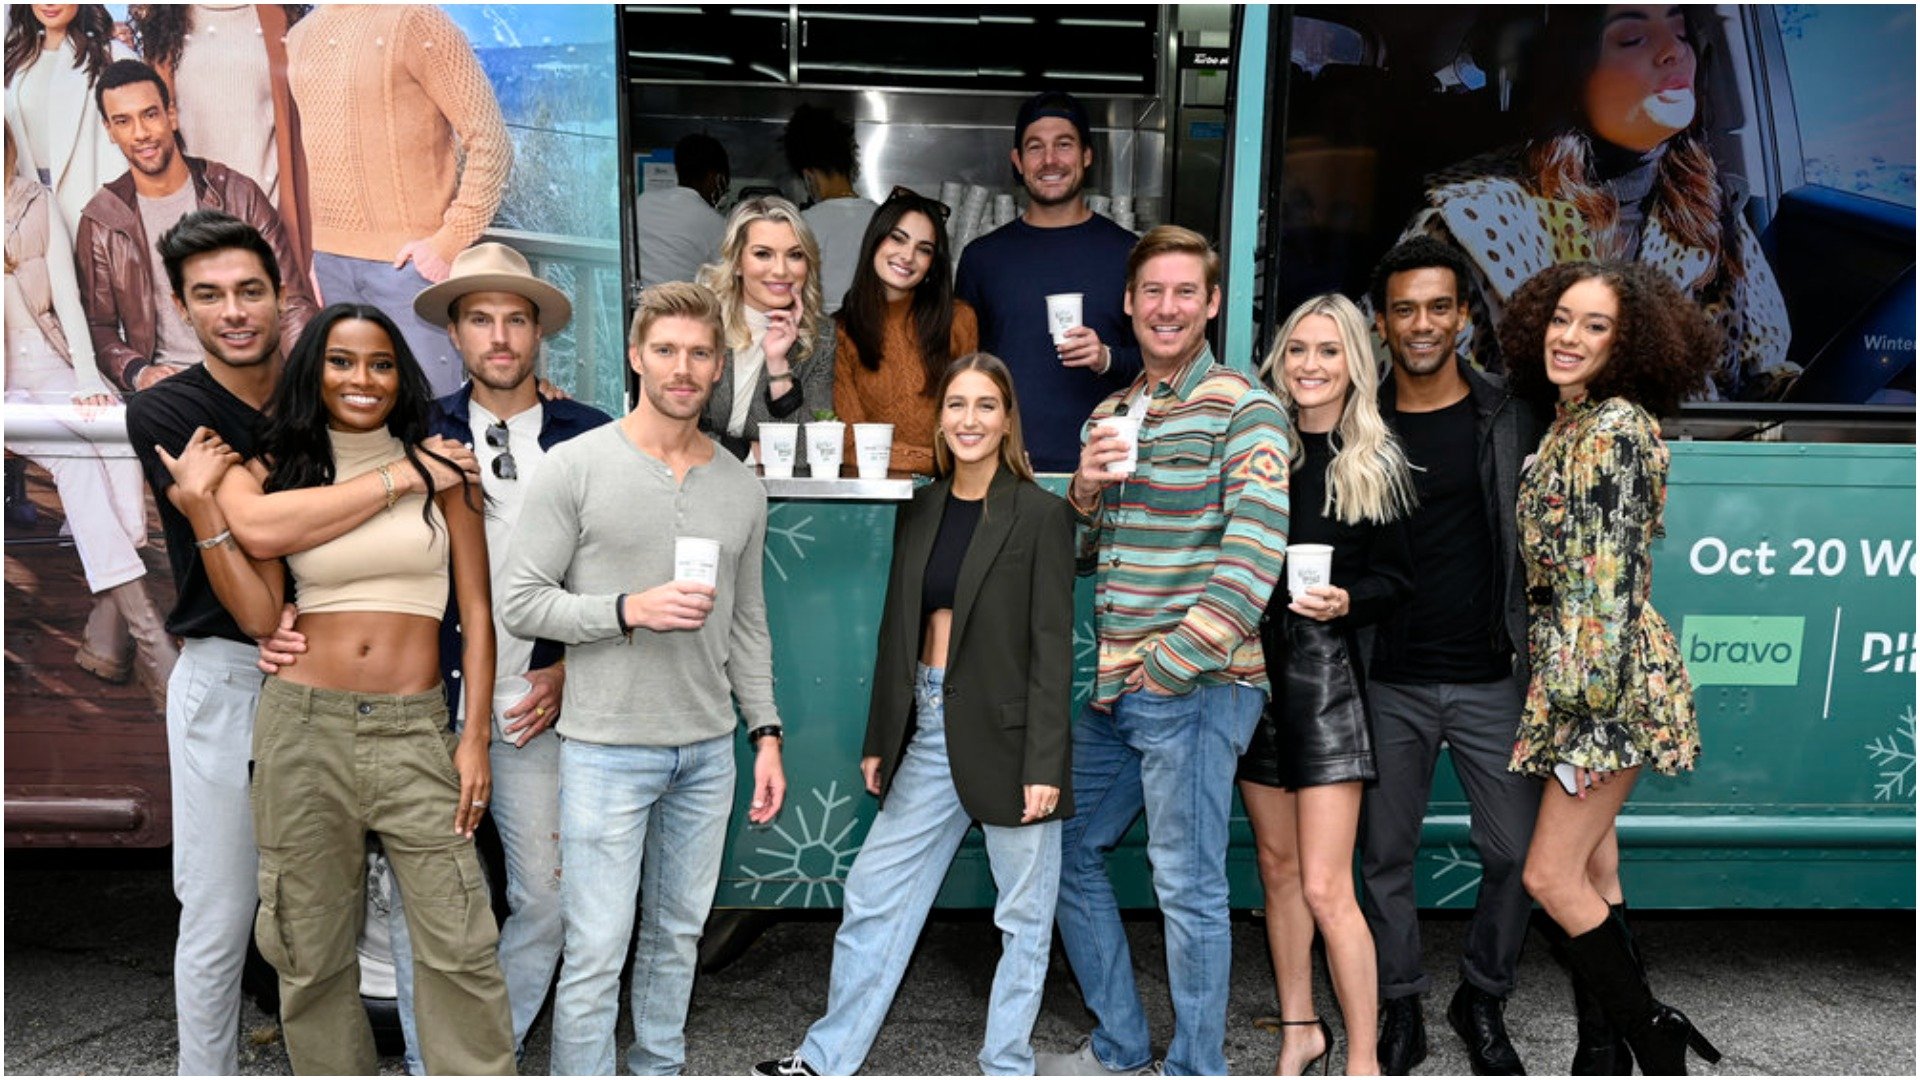 The cast of Bravo's new show 'Winter House' standing in front of a food and beverage truck